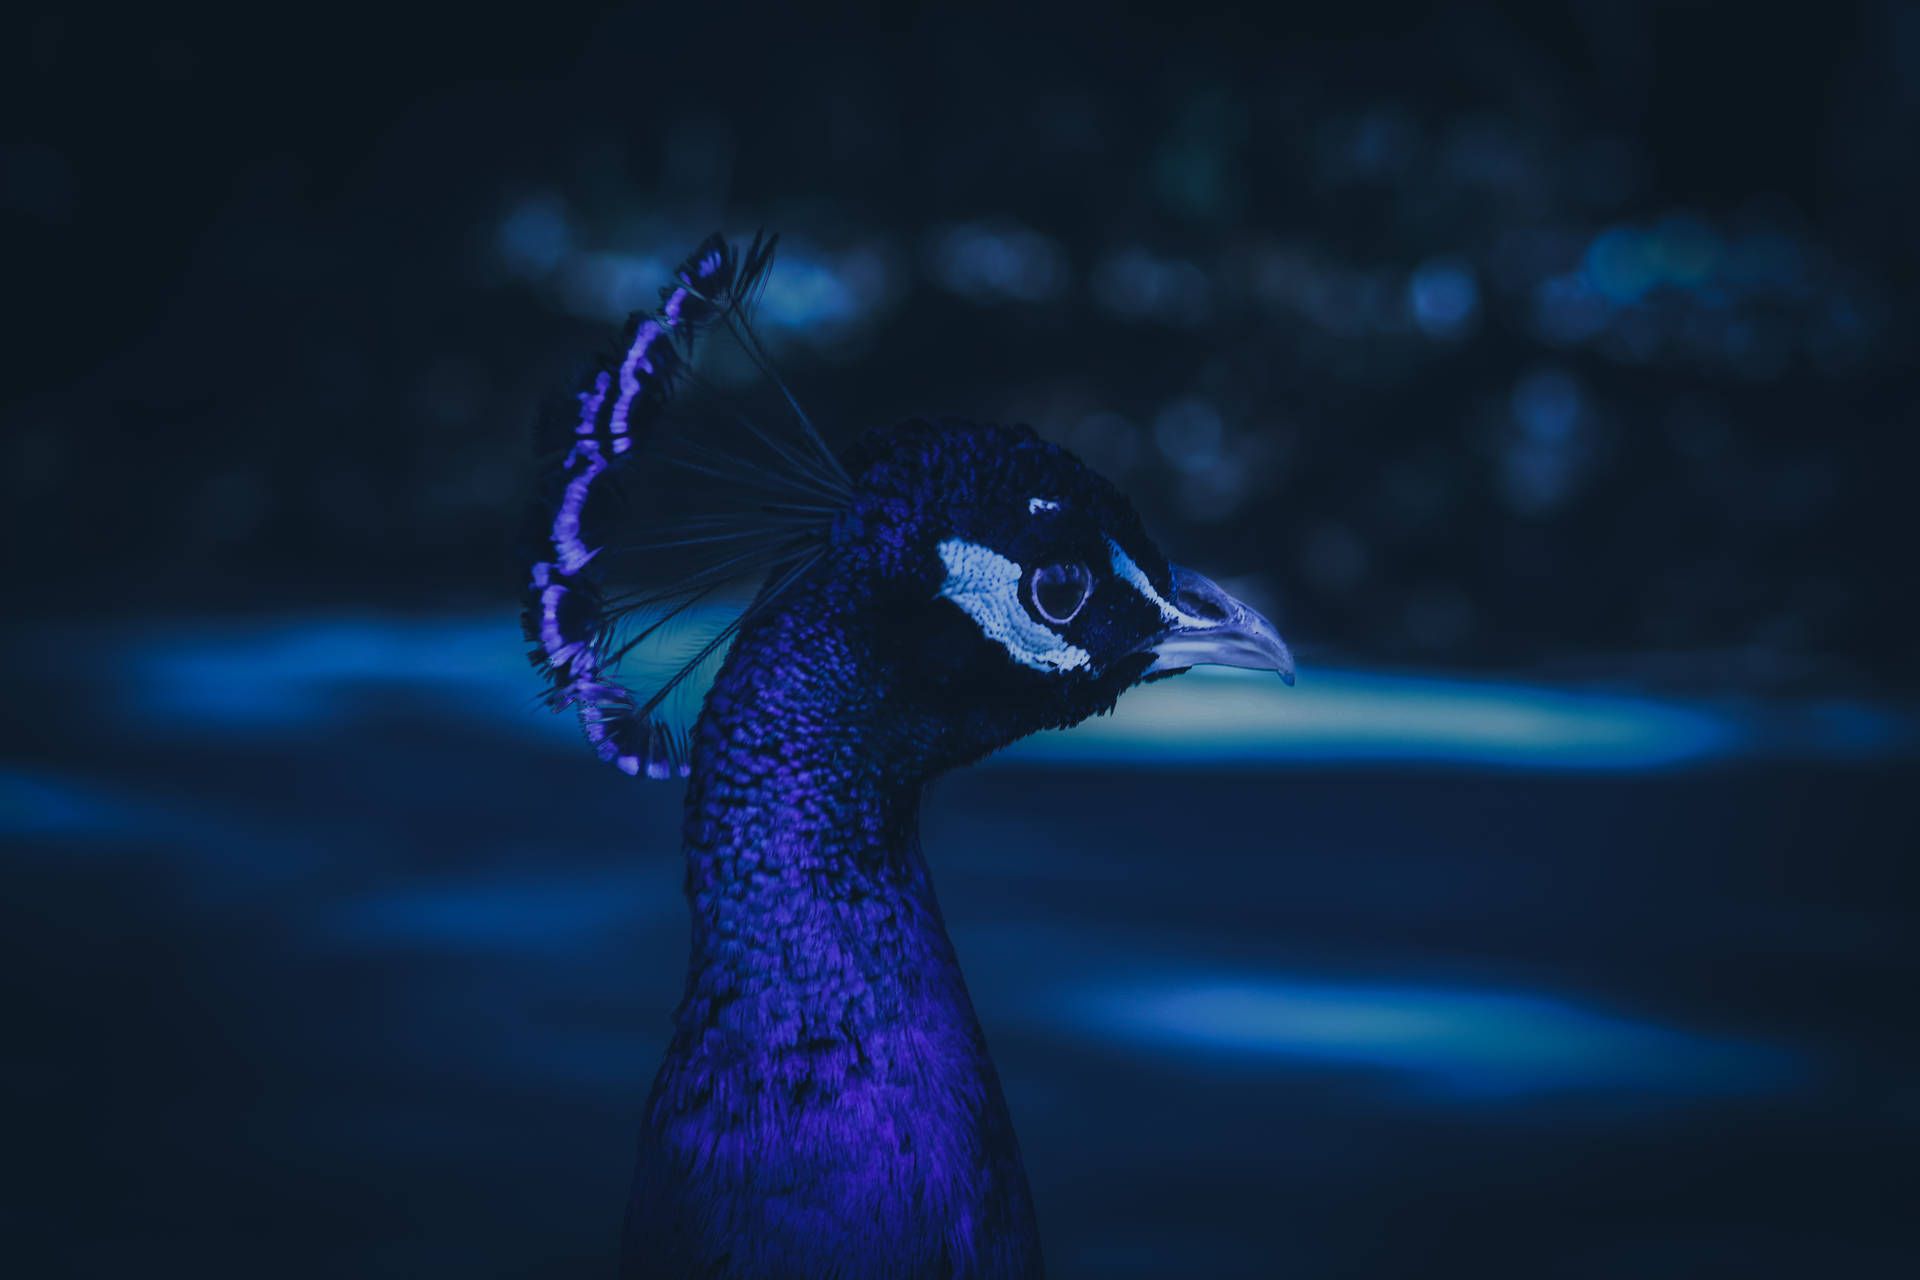 A blue and purple peacock standing in the dark. - Blue